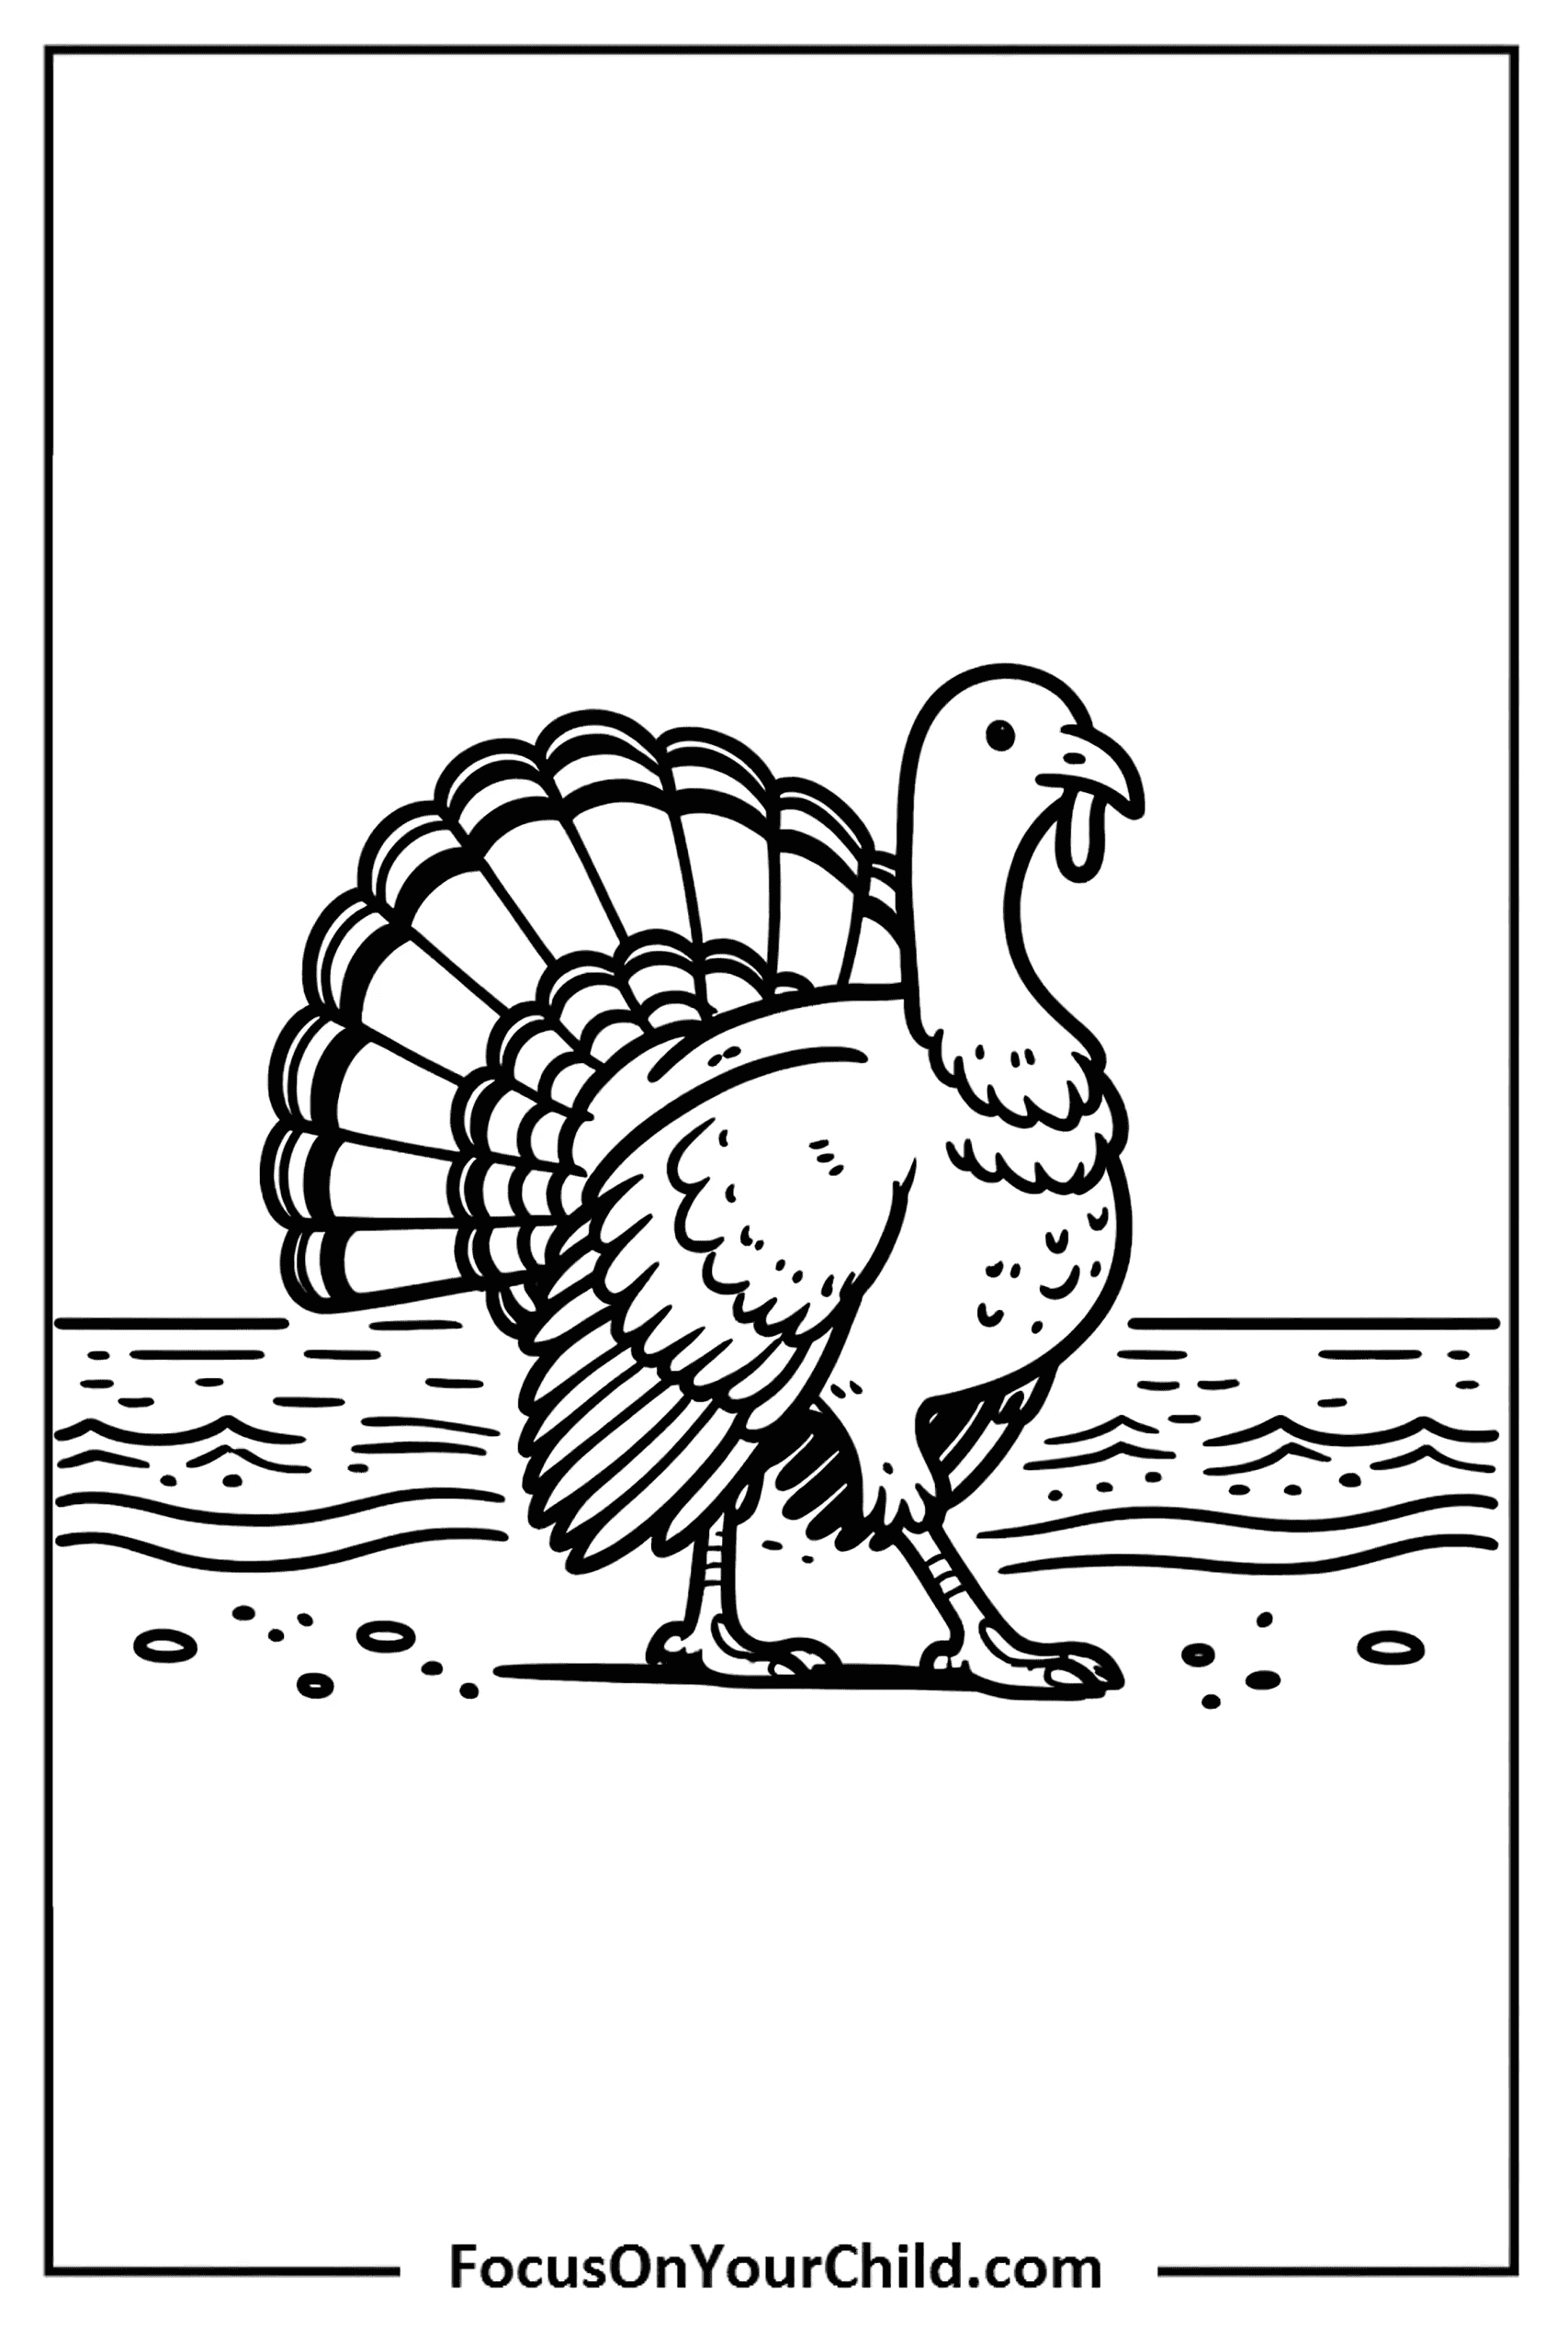 Majestic turkey standing on beach, detailed line drawing.